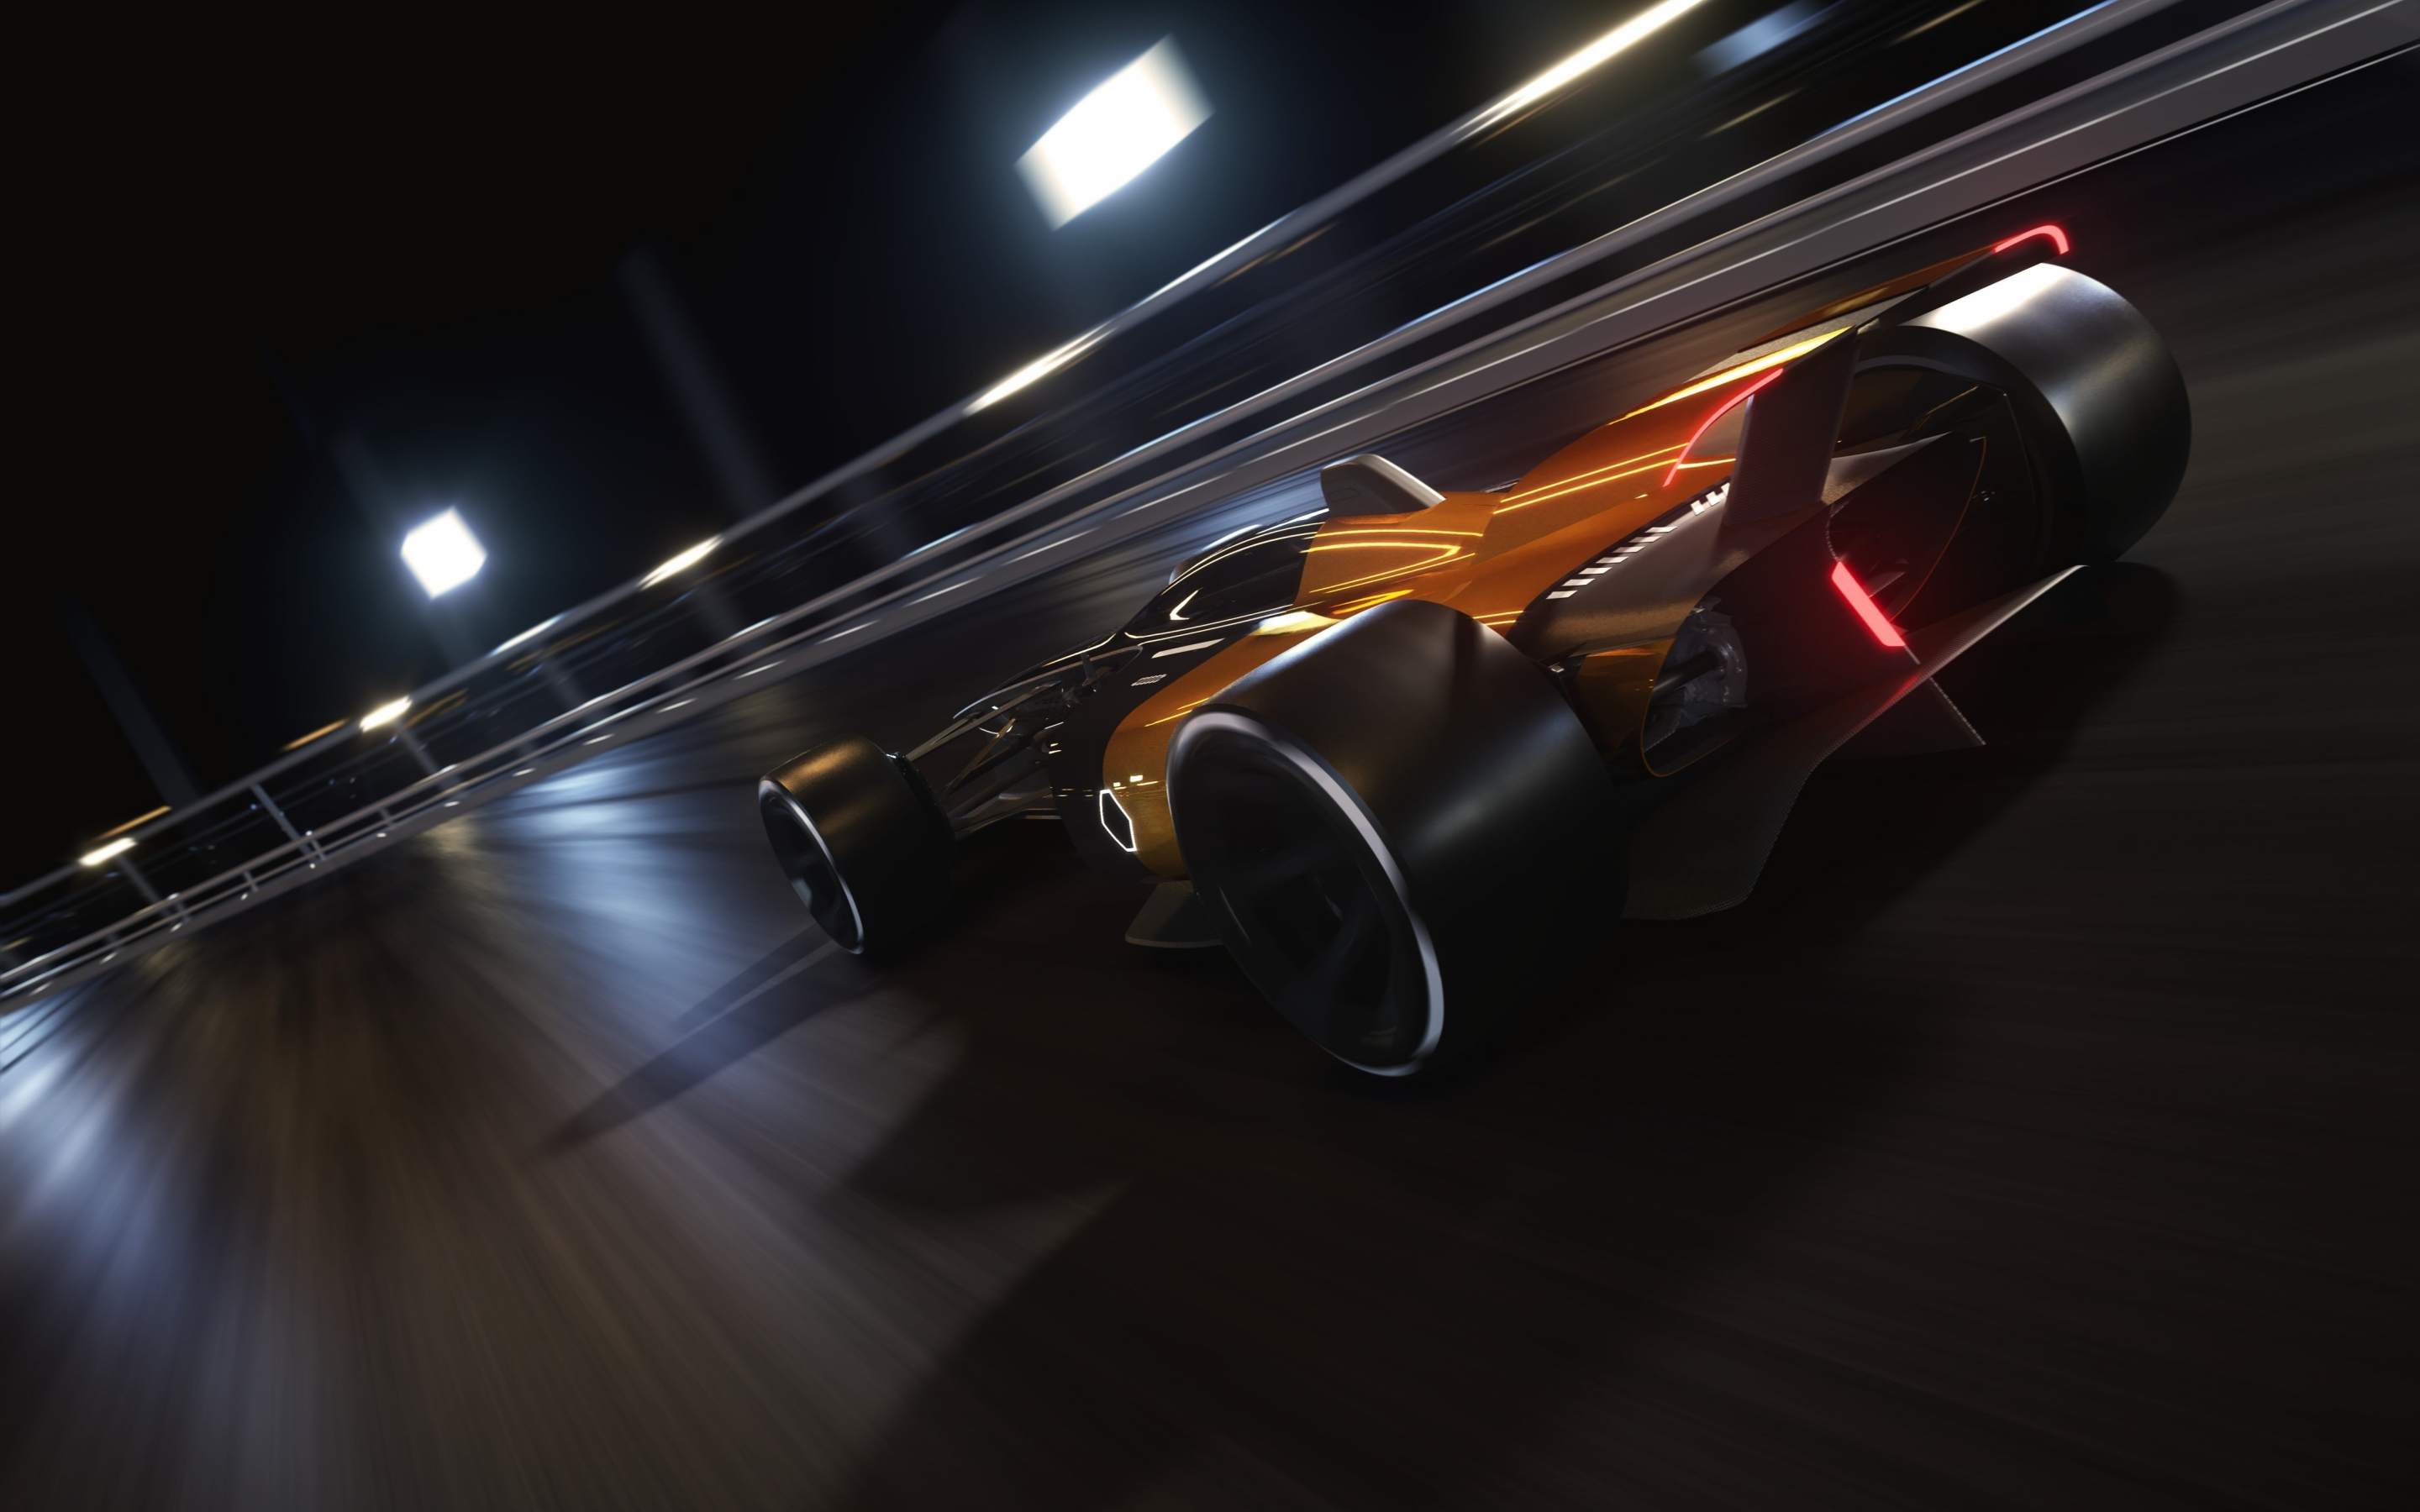 Renault R.S. 2027 Vision, sports car, on-road, 2880x1800 wallpaper